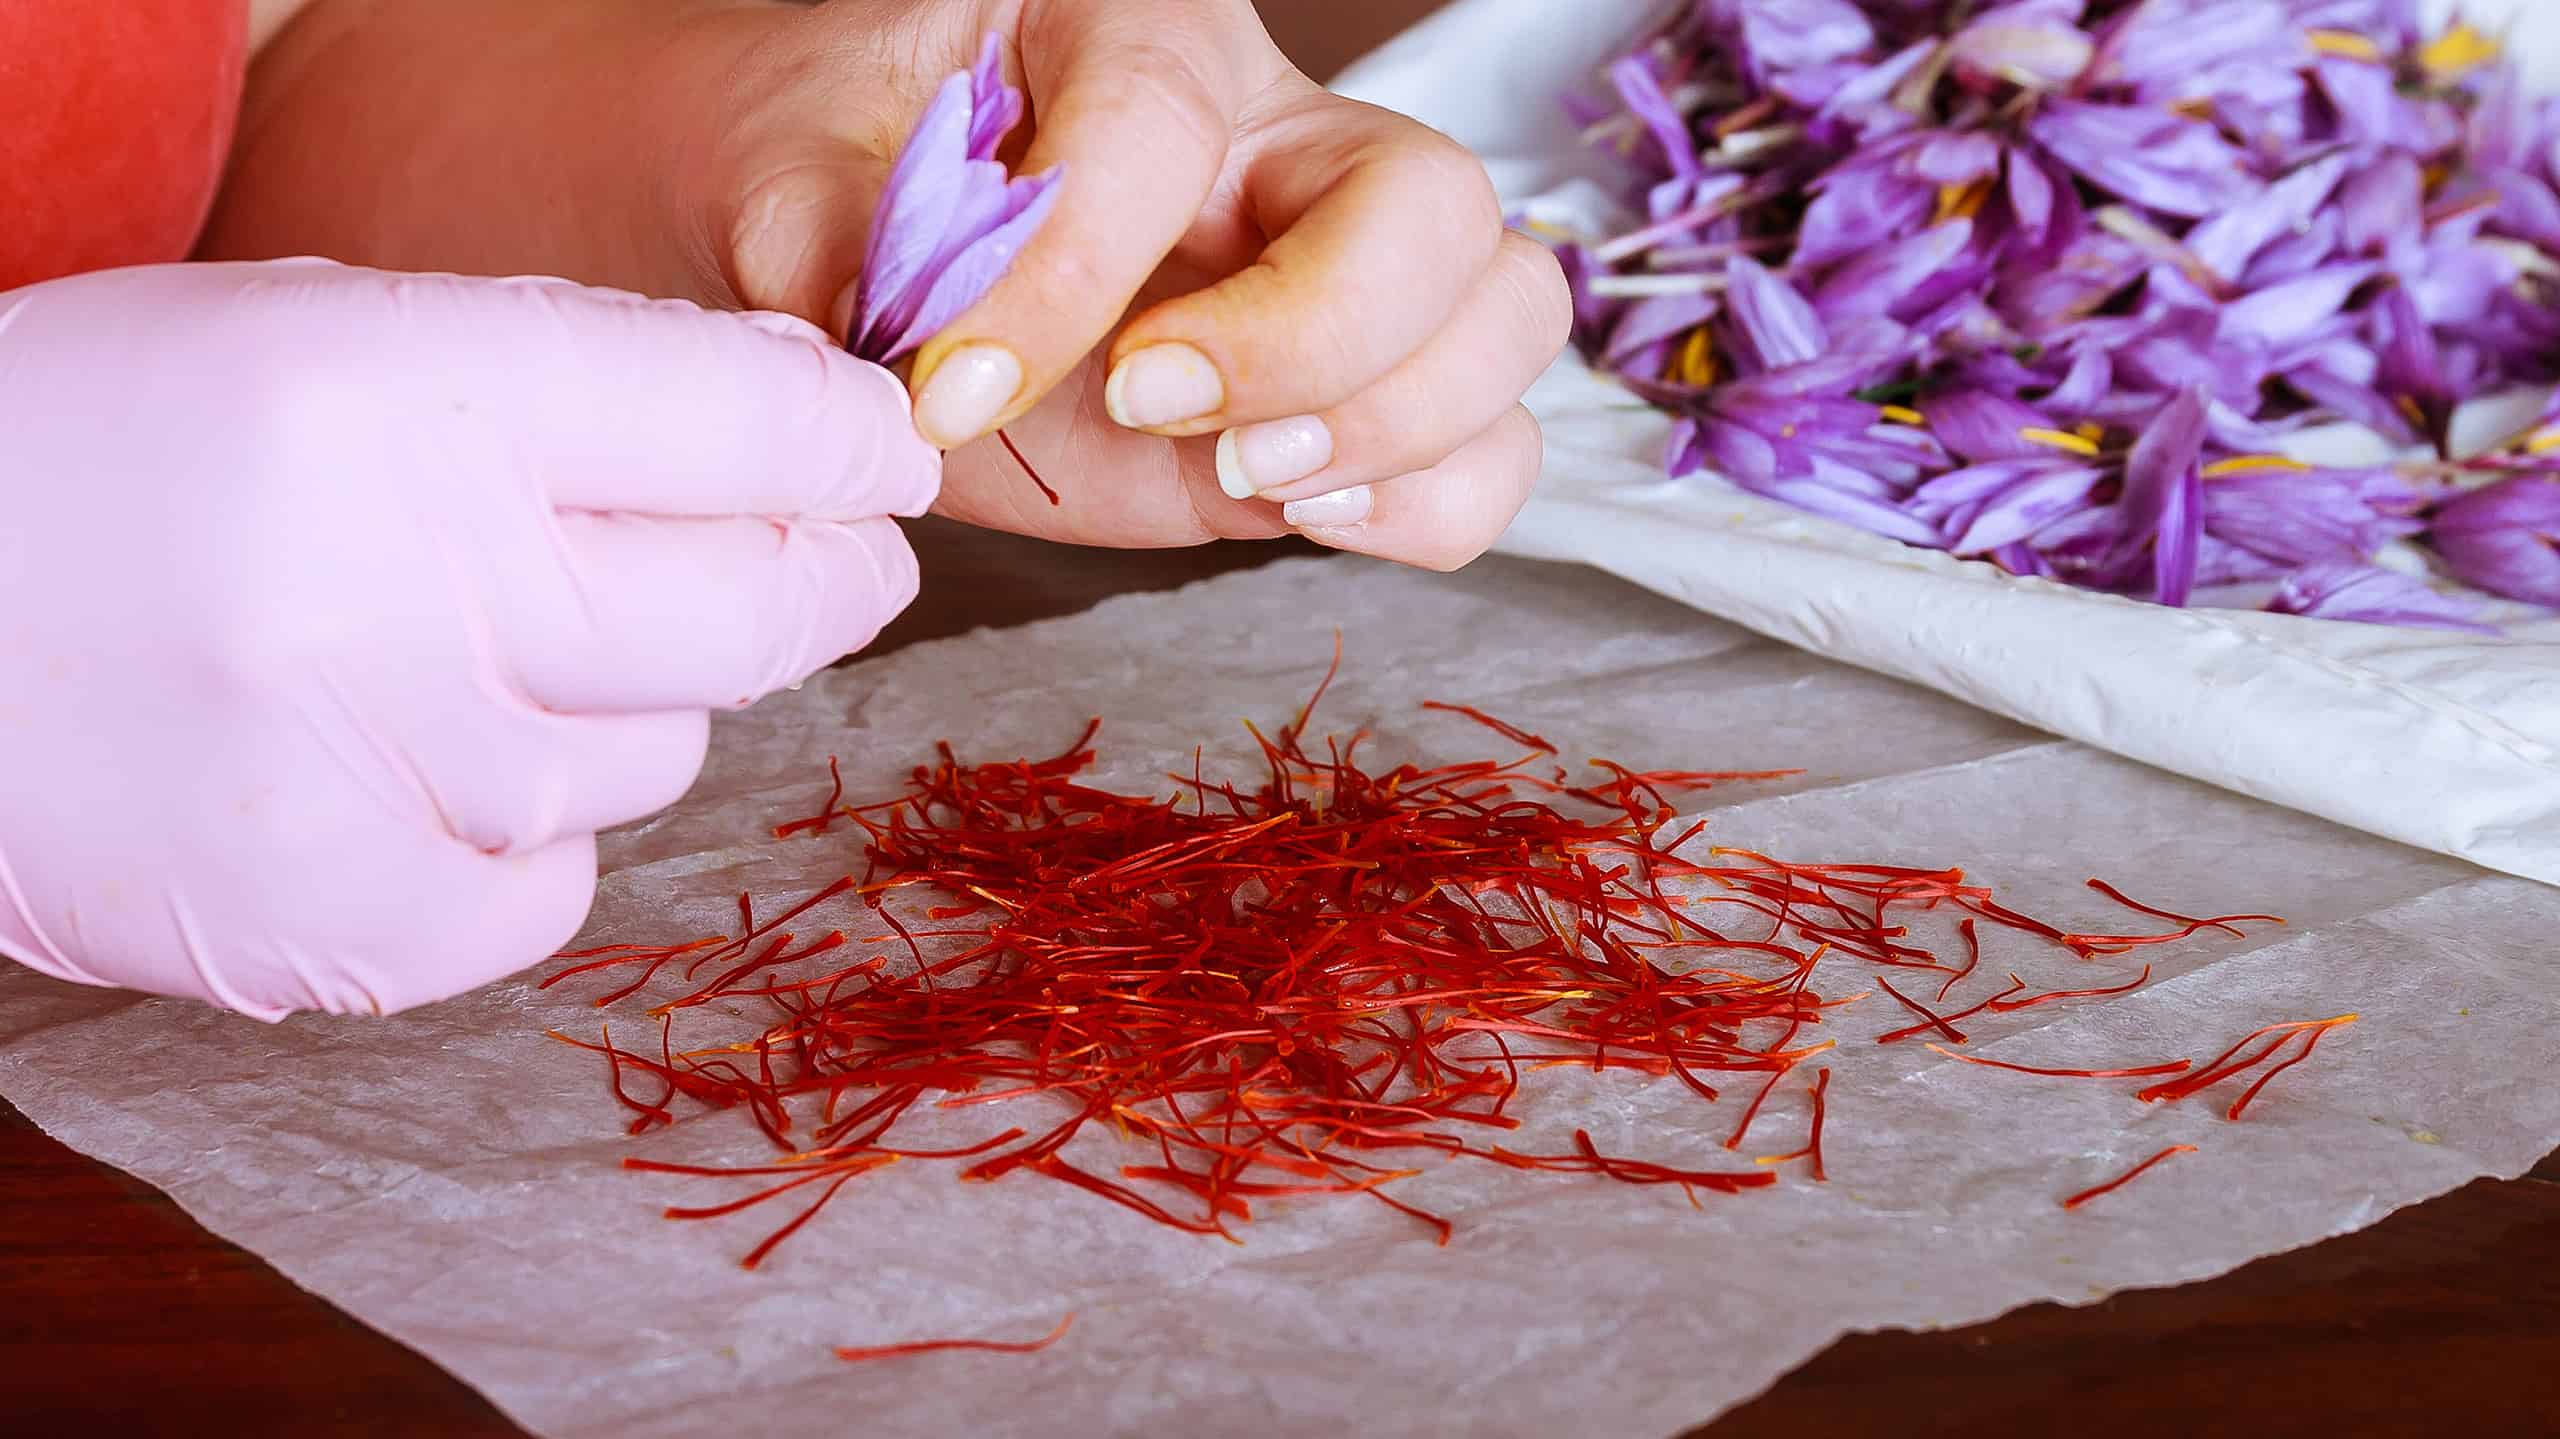 Separation of saffron threads from the rest of the flower